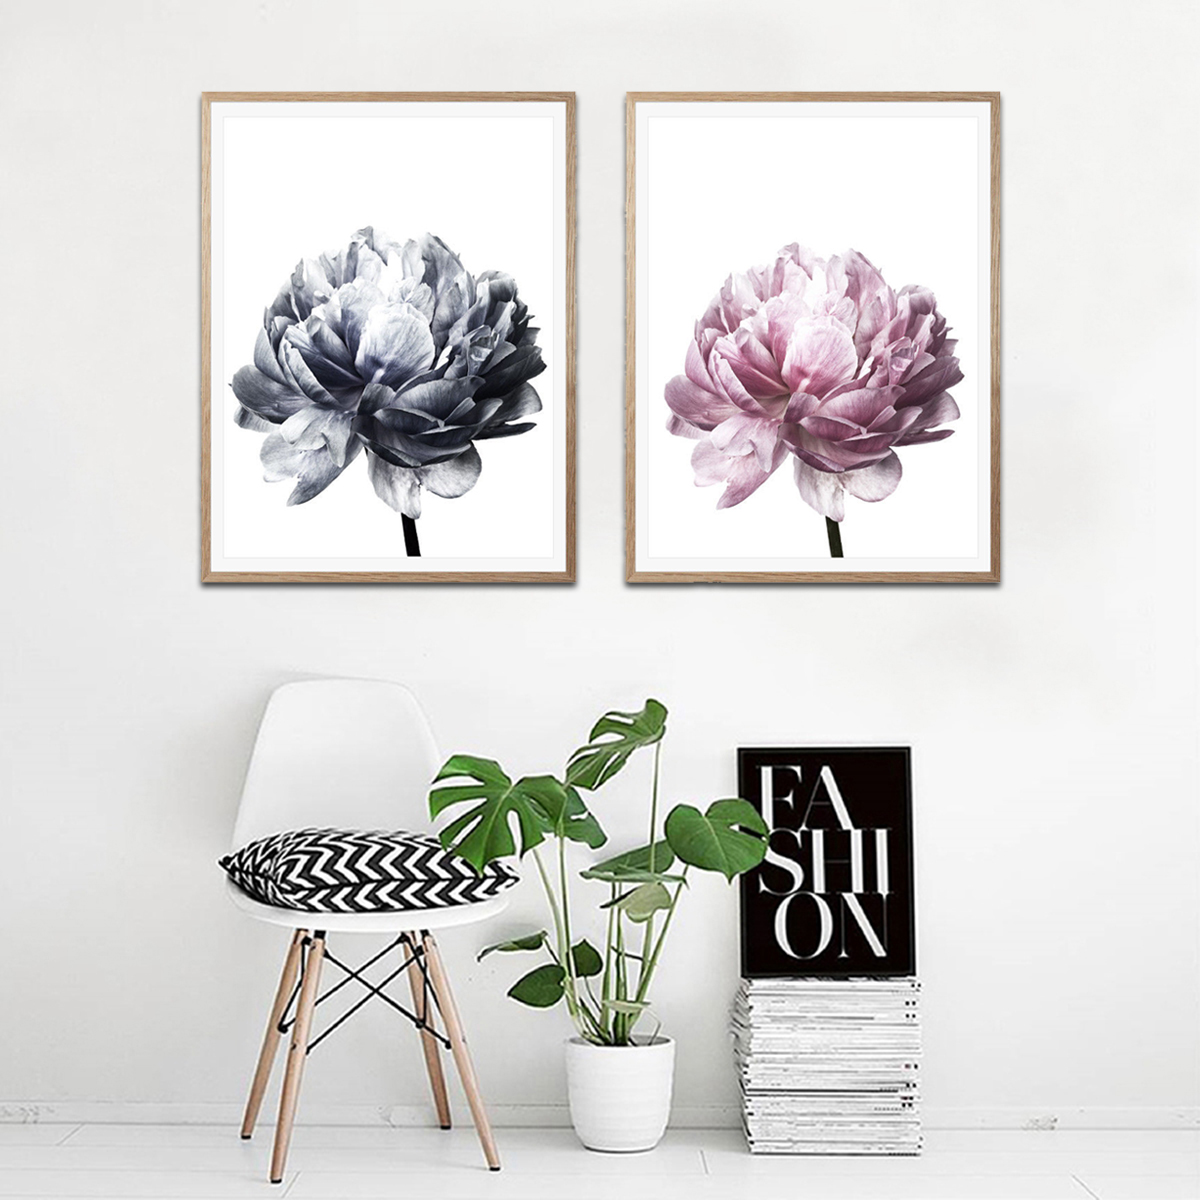 20x3030x40cm-Flower-Modern-Wall-Art-Canvas-Paintings-Picture-Home-Decor-Mural-Poster-with-Frame-1632681-2